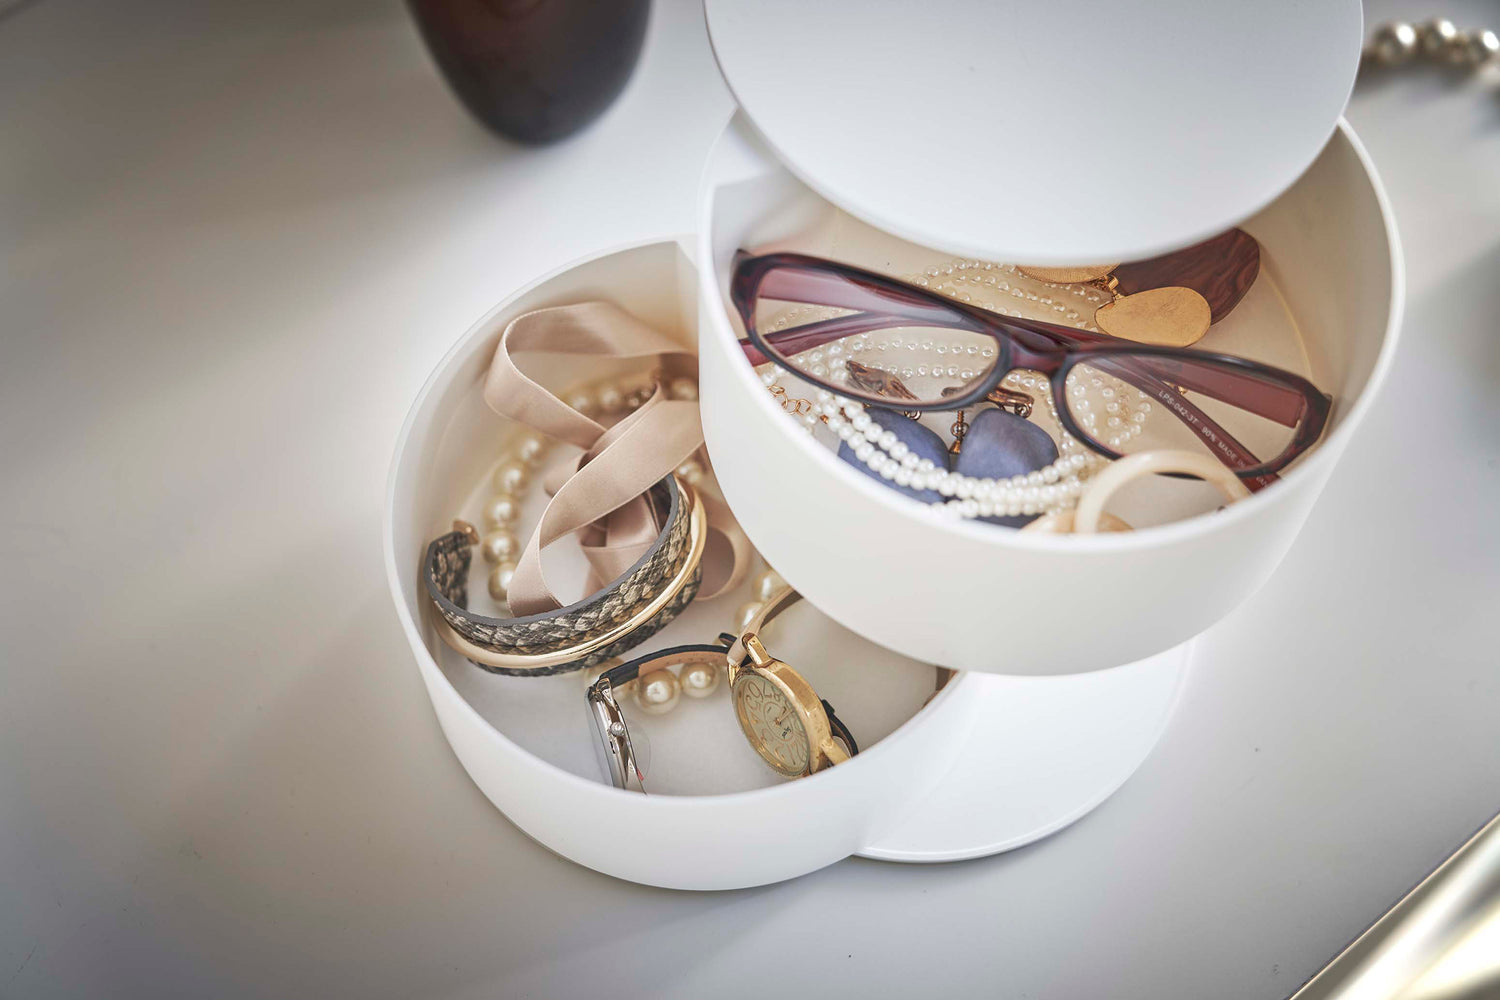 View 6 - A detailed view of a two-tier white swivel accessory holder. The tiers and lid are swiveled open so the inside contents can be seen. In the first tier are a pair of reading glasses, earrings, and other various jewelry. The second tier holds a watch and an assortment of bracelets.